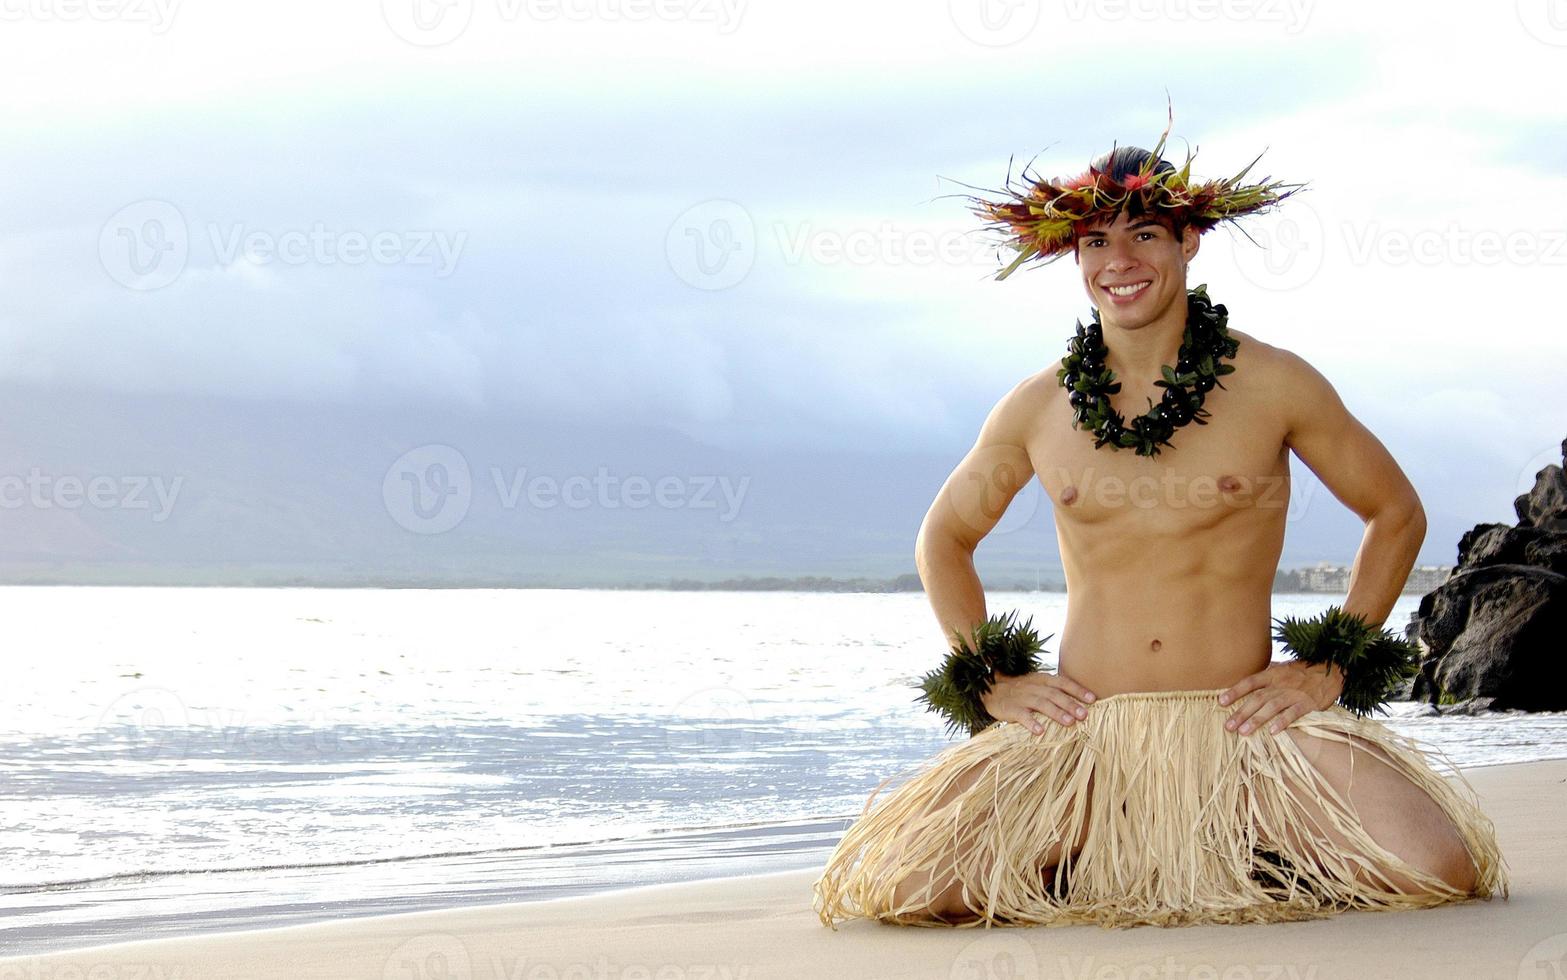 Male Hula Dancer ends a performance on the sand with a big smile. photo